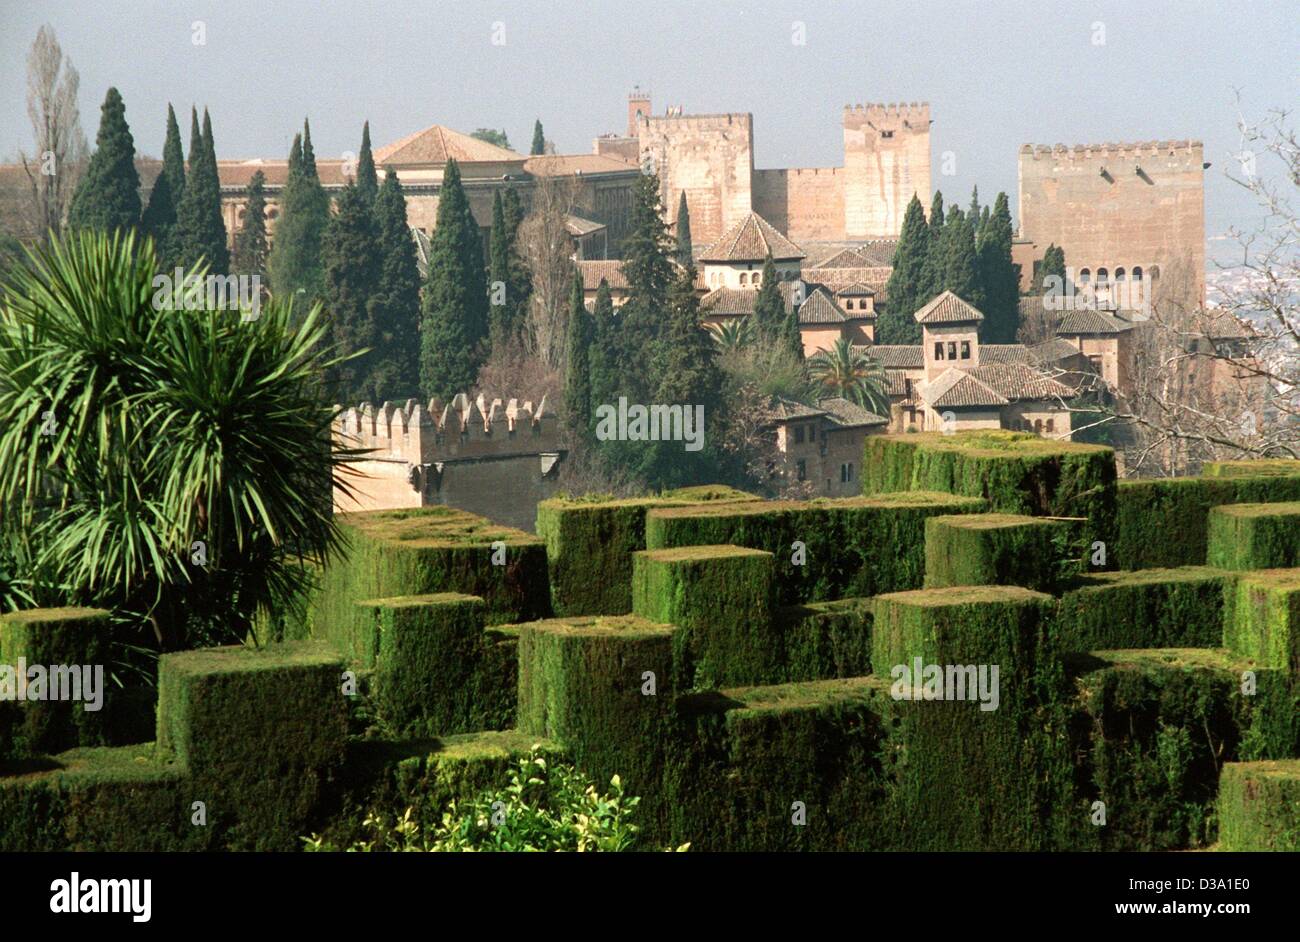 (dpa) - The gardens of the summer residence Generalife with a view of the Alhambra of Granada, 10 March 2002. The ancient palace of the Alhambra was founded in the 13th century and was inhabited for 250 years by Moorish kings of the Nasrid dynasty and marks a climax of Islamic architecture. In 1984  Stock Photo